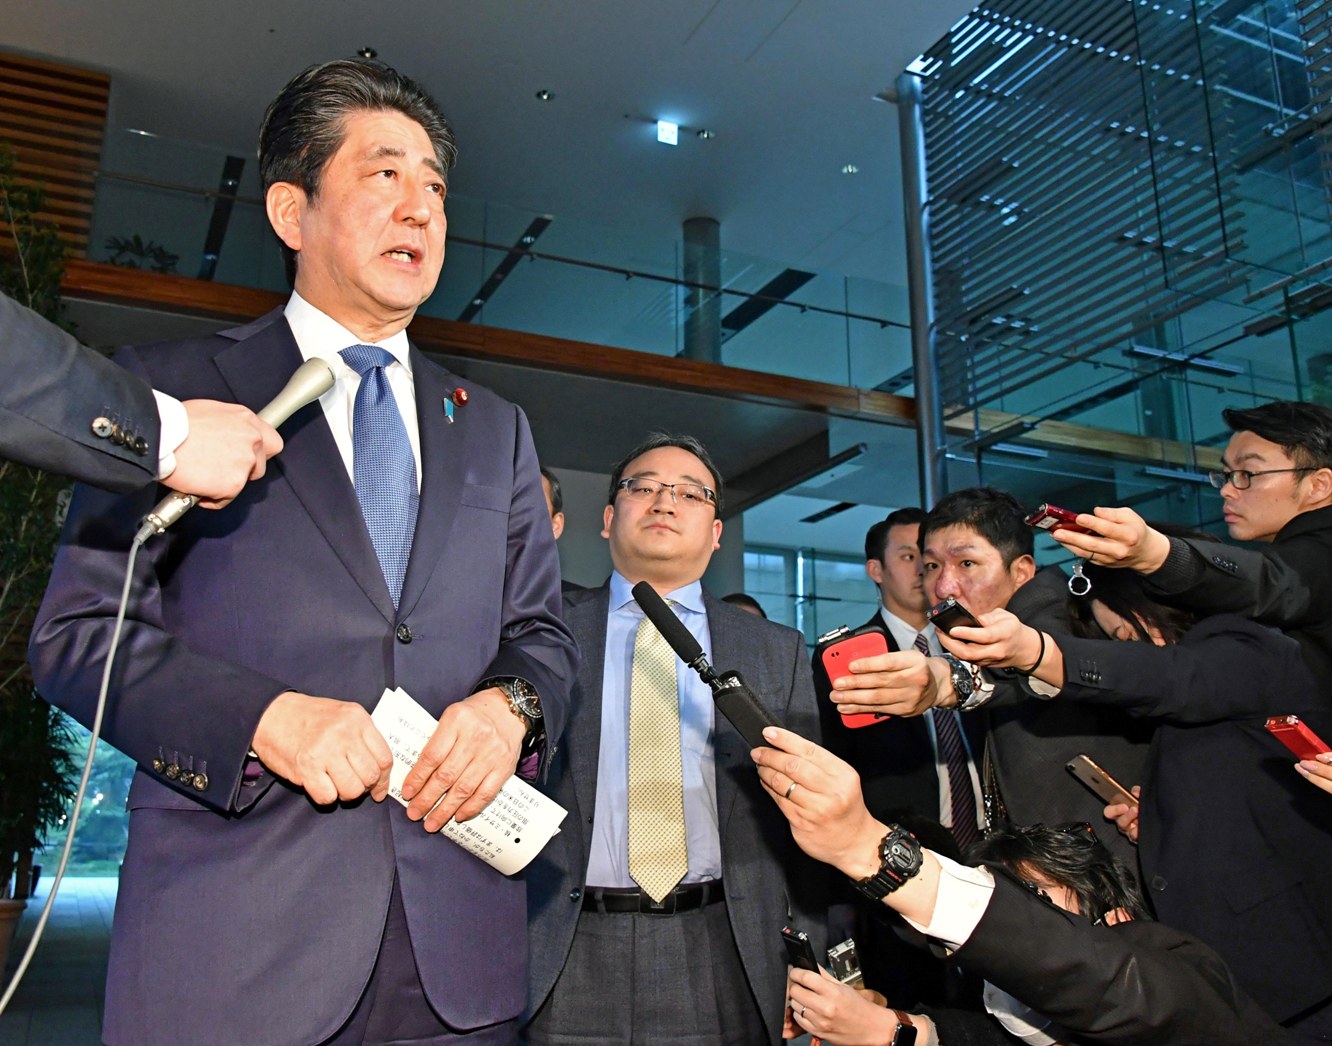 Prime Minister Shinzo Abe talks with members of the press